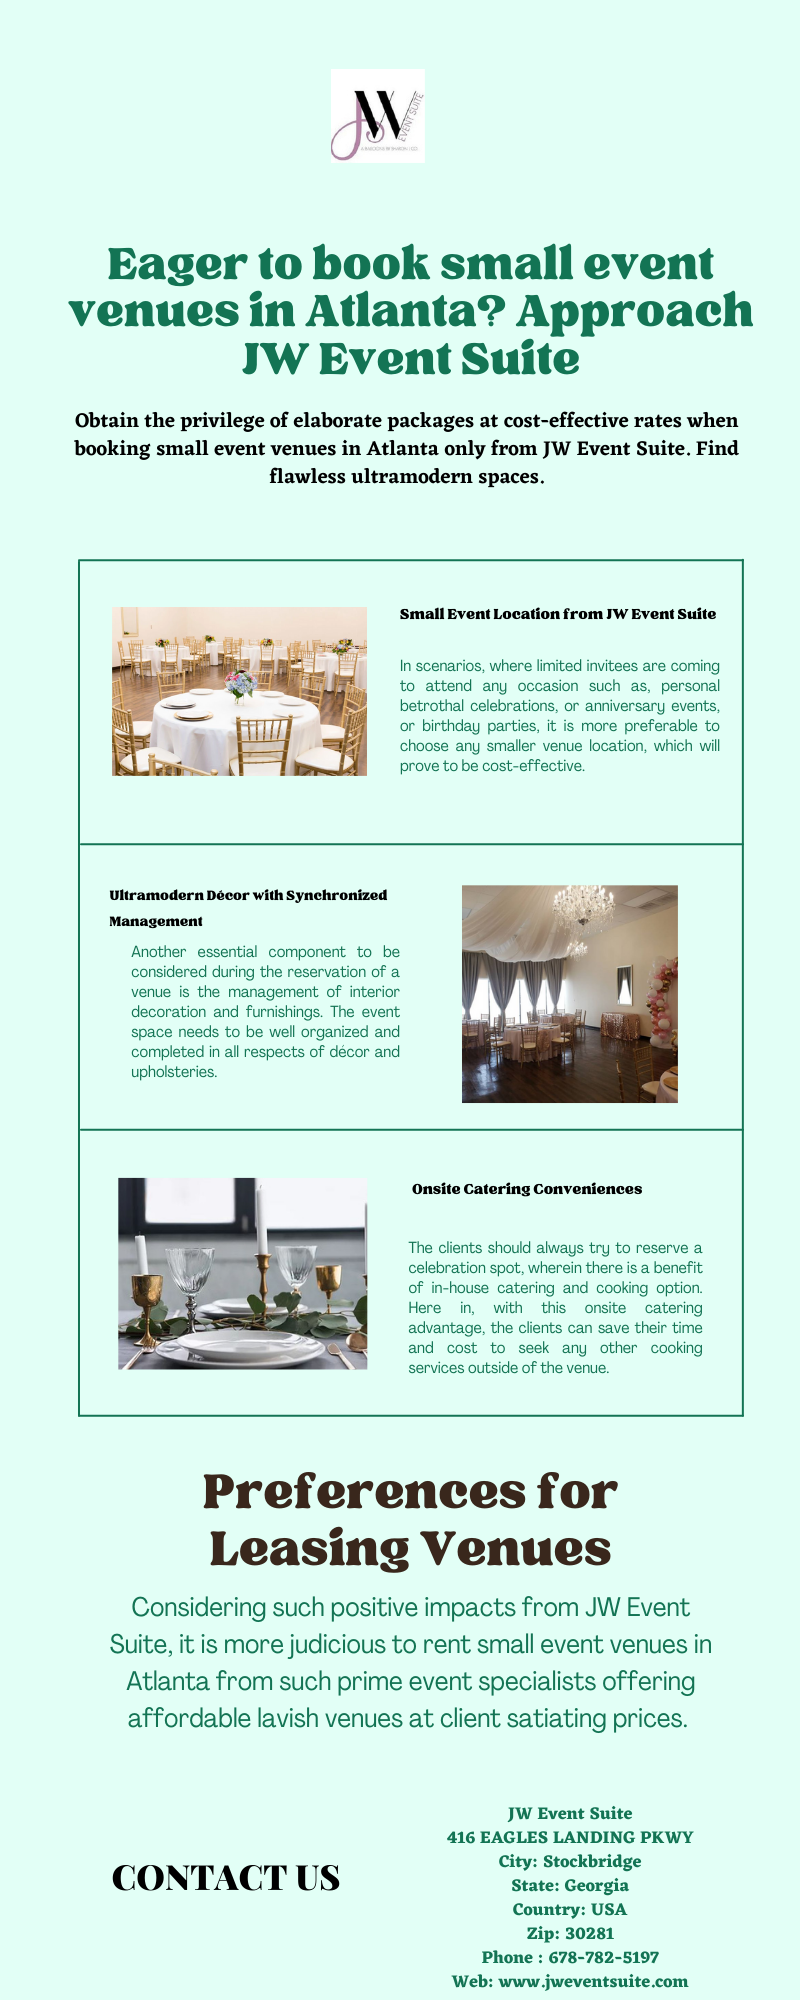 Eager to book small event venues in Atlanta Approach JW Event Suite.png  by Jweventsuite